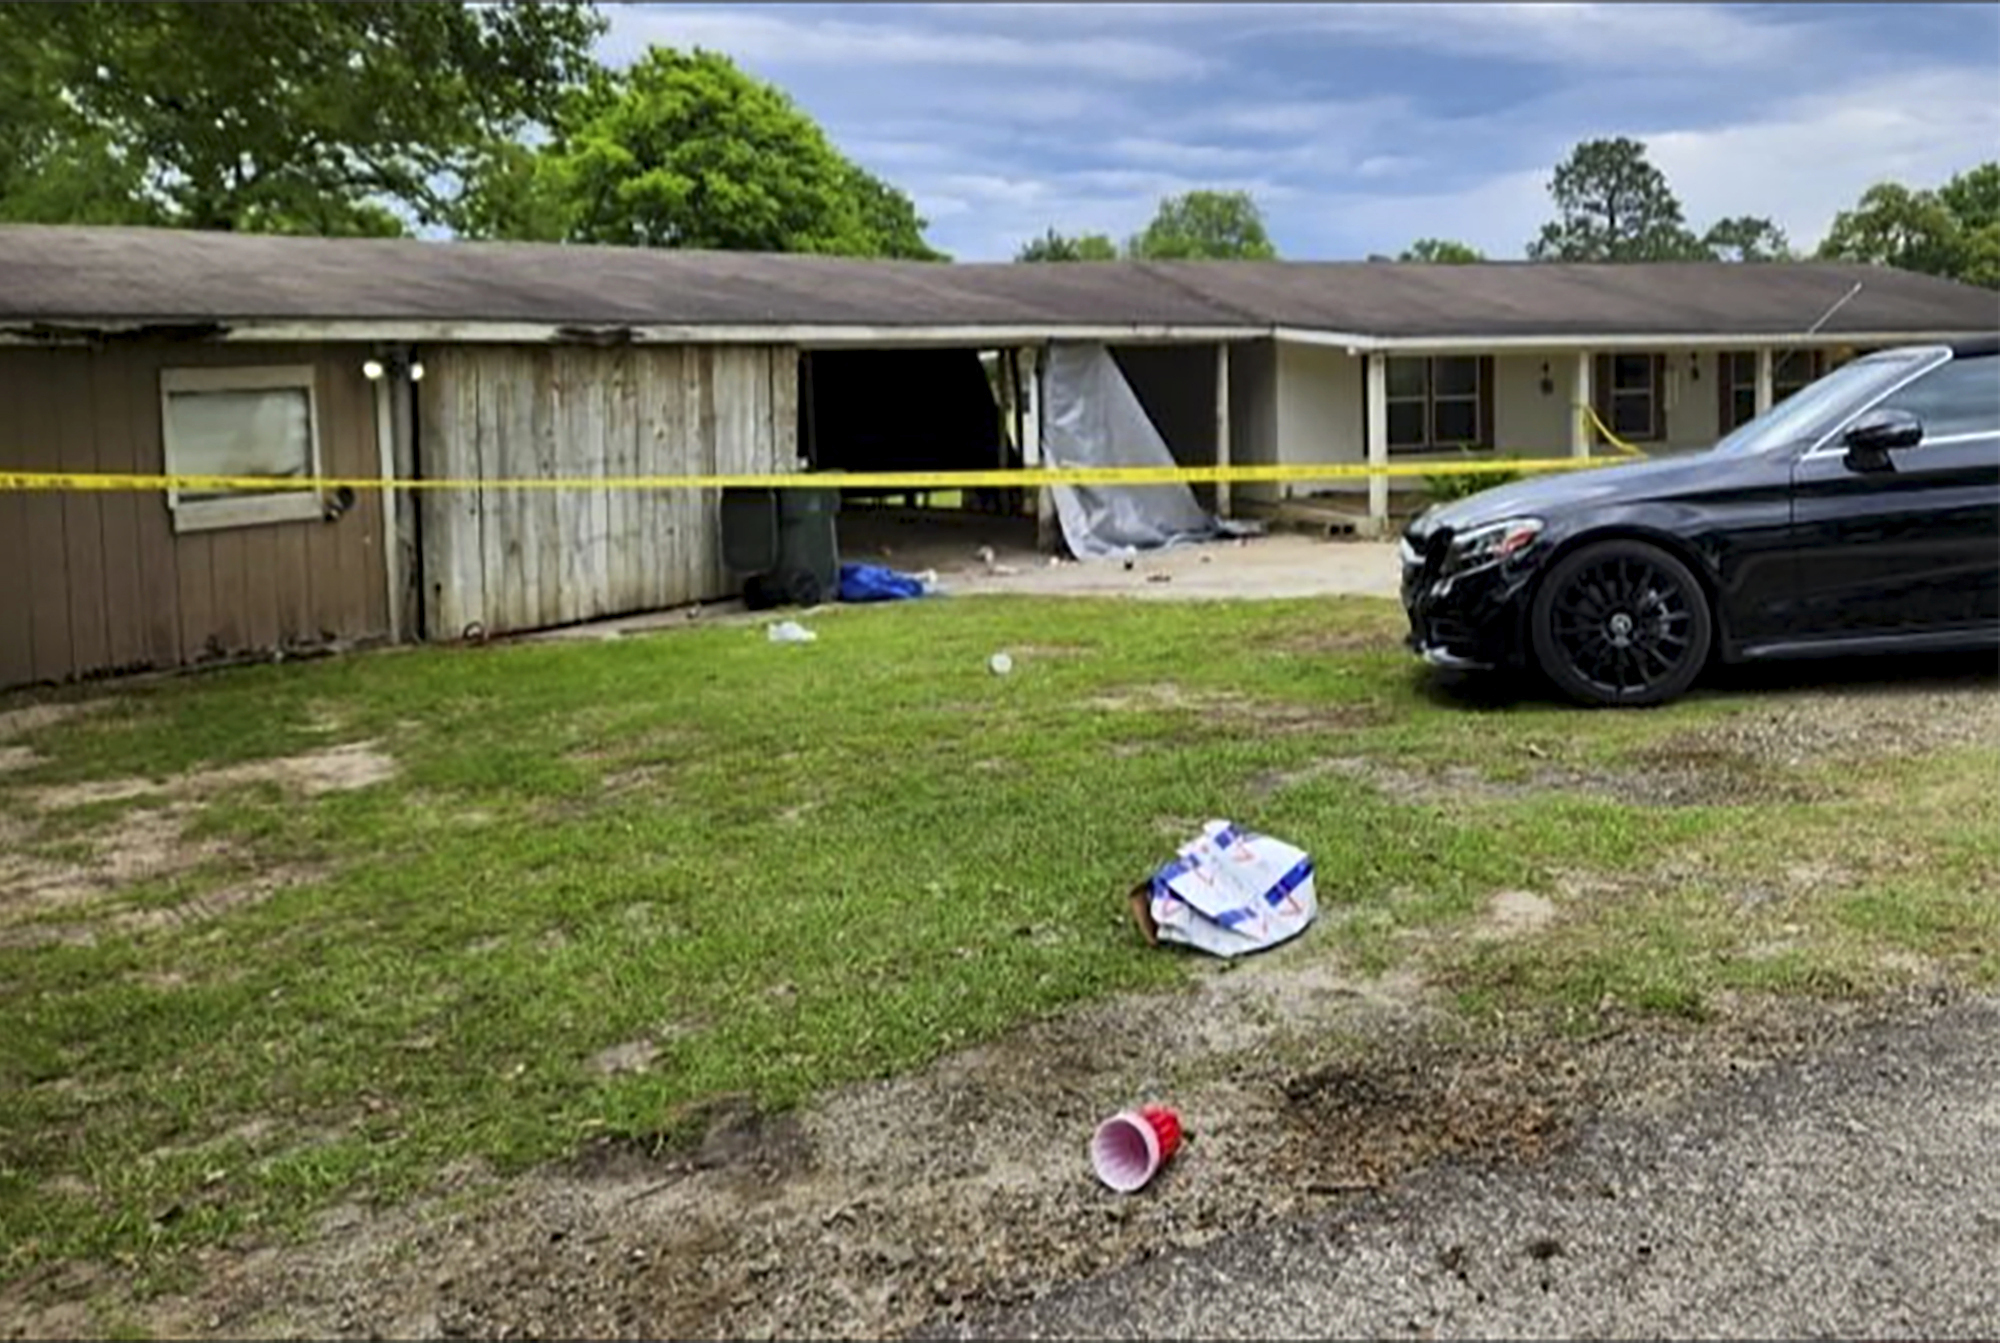 PHOTO: In this photo provided by KJAS, crime scene tape cordons off the scene of a shooting at a prom after-party, April 23, 2023, in Jasper, Texas.